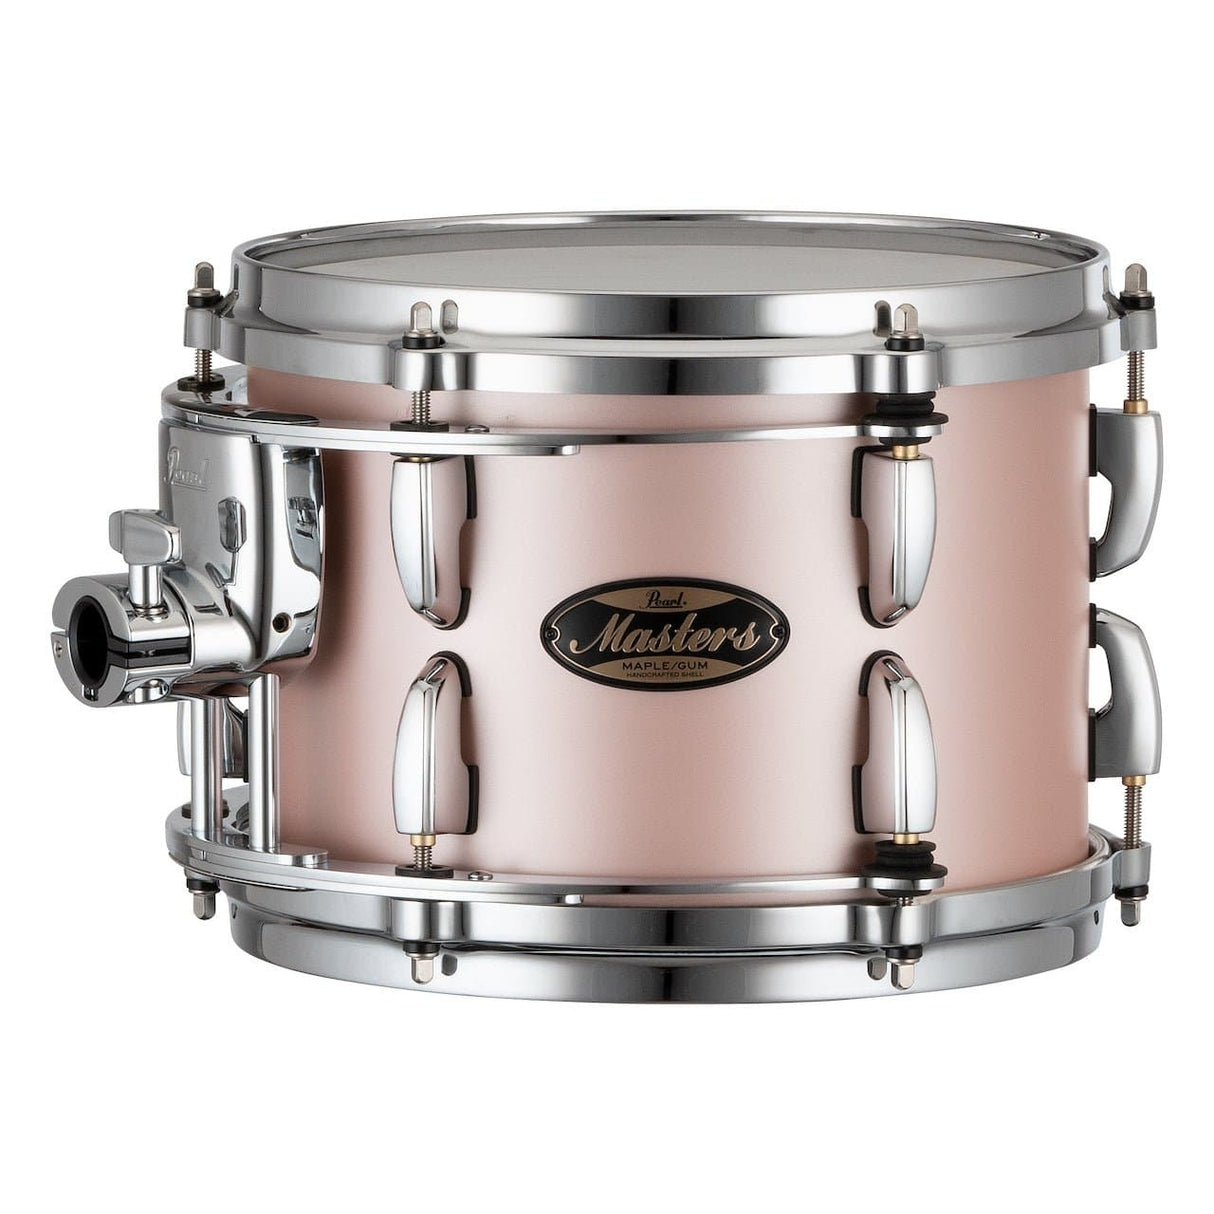 Pearl Masters Maple/Gum Tom 10x7 w/Standard R2 Mount Satin Rose Gold